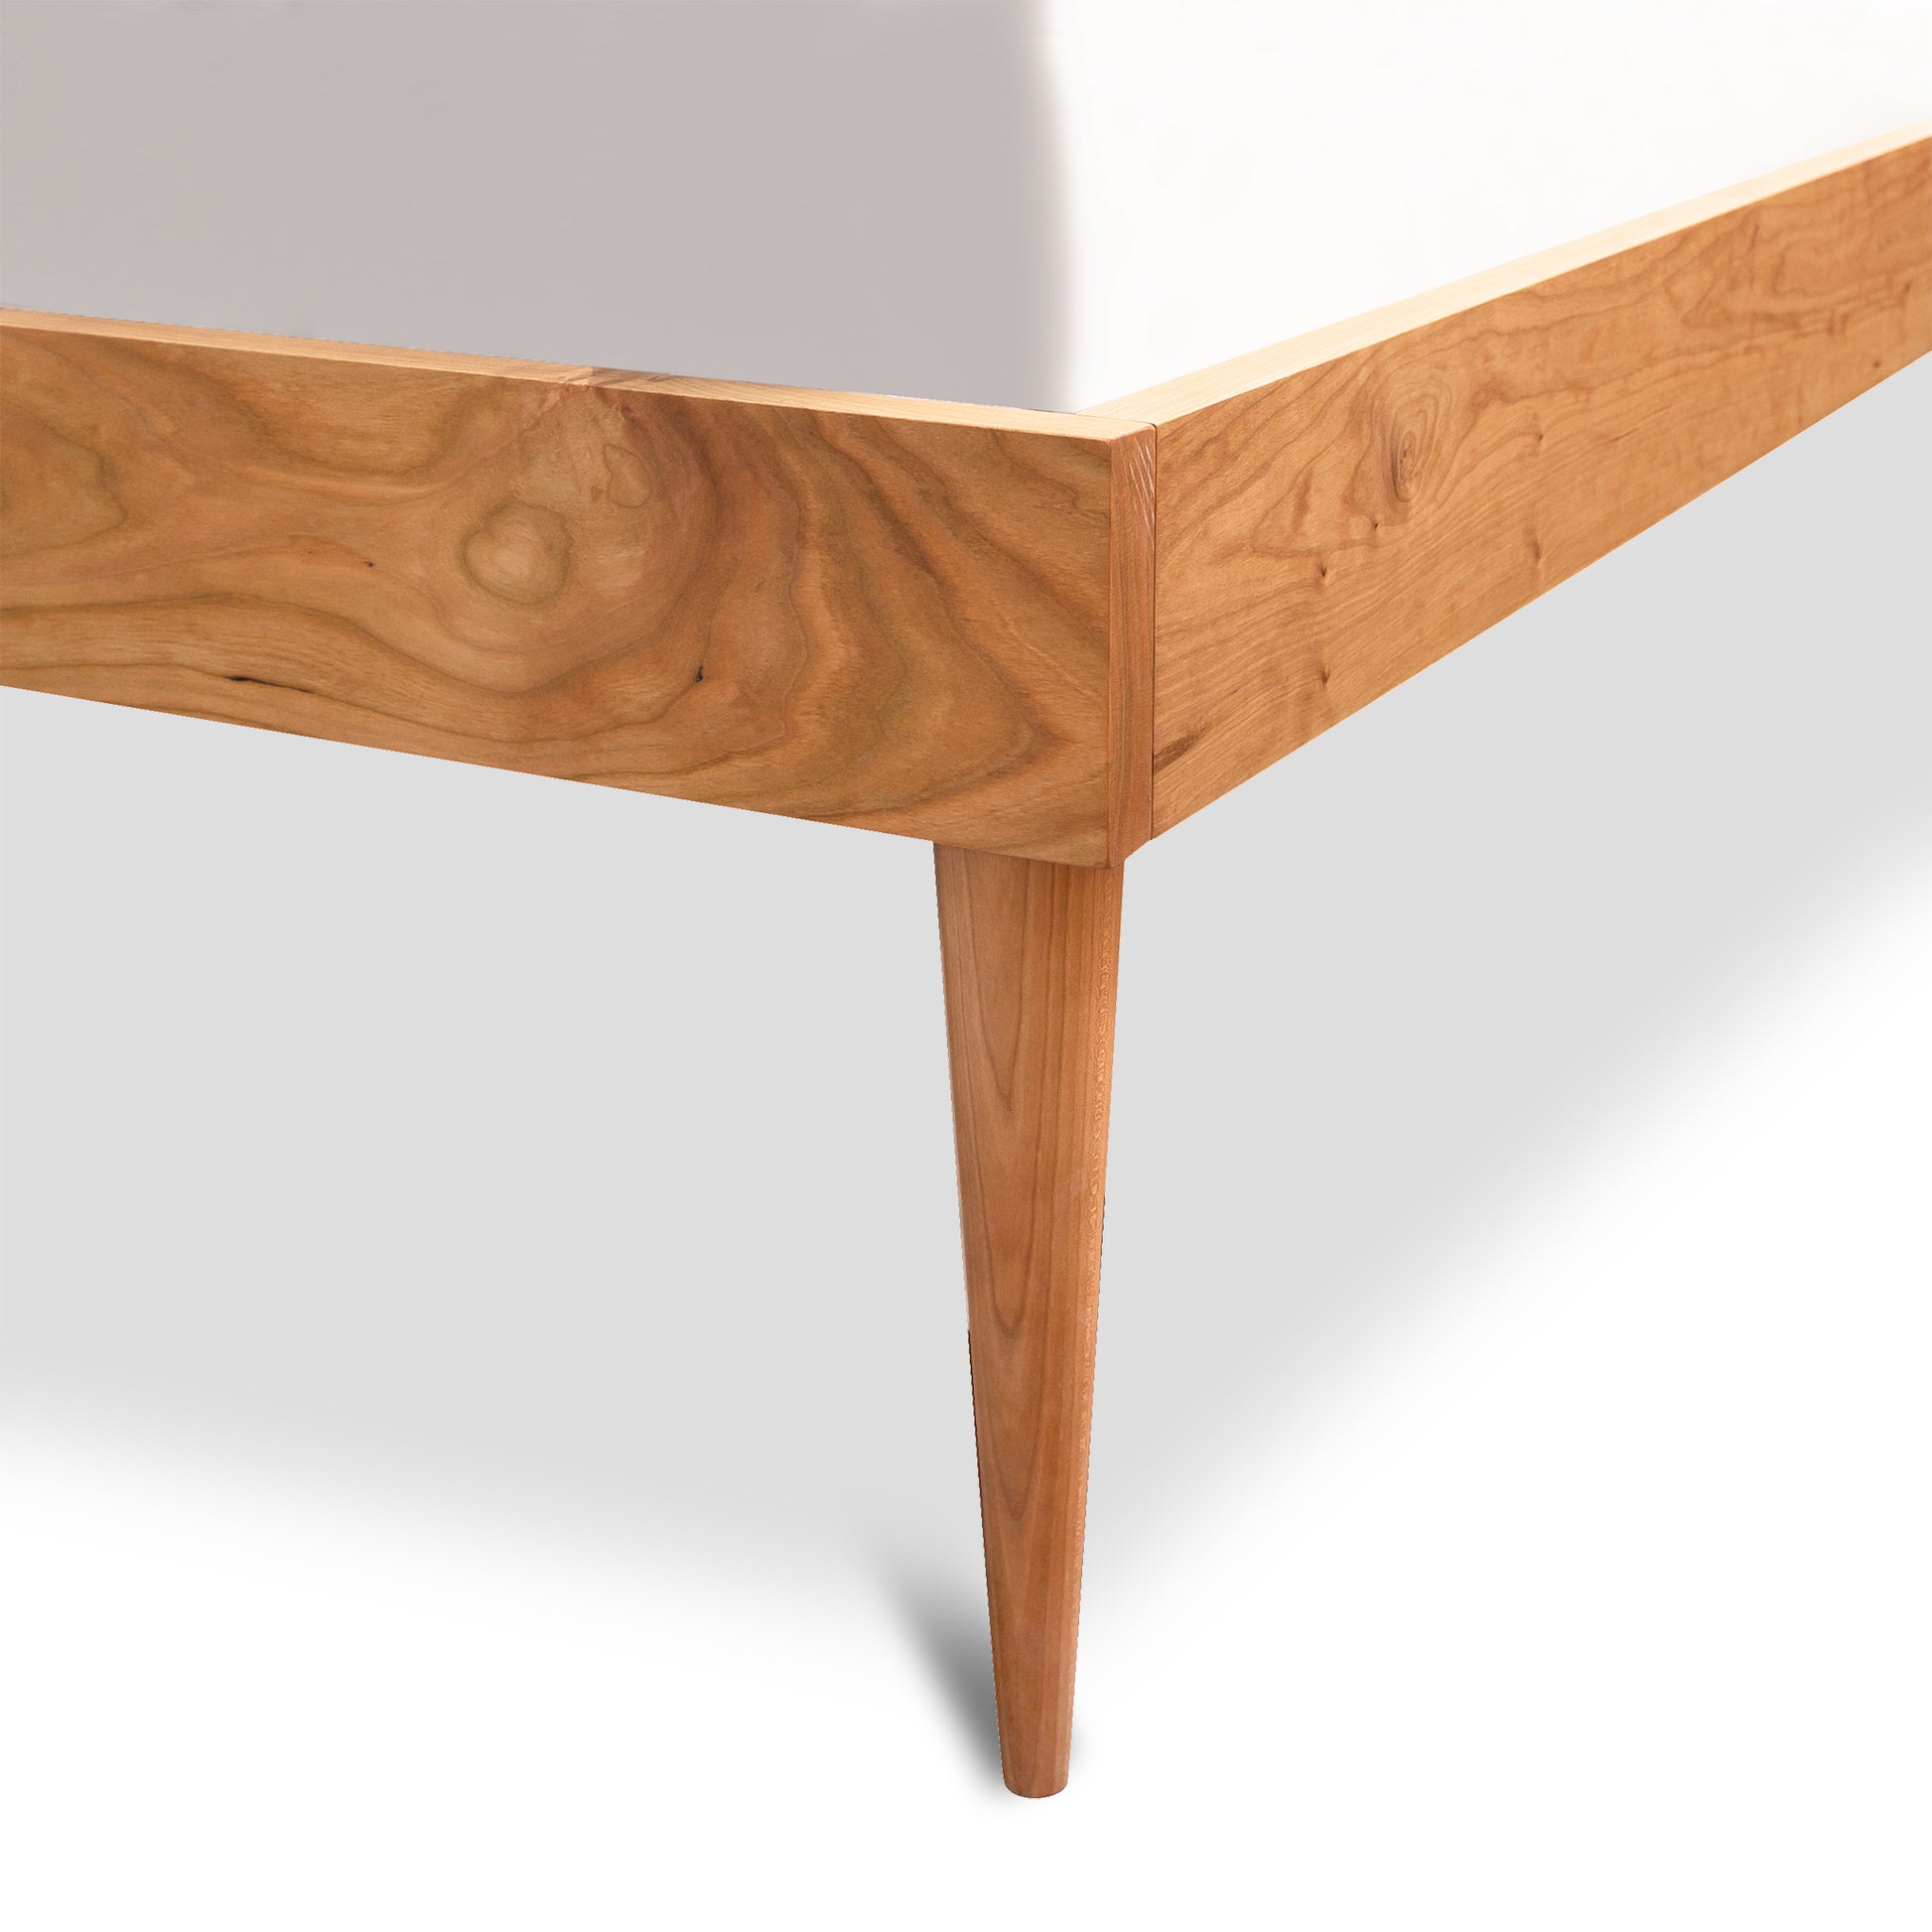 A close-up view of the corner of a Larssen Bed from Vermont Furniture Designs, showing the grain pattern and one tapered table leg, reflecting a mid-century modern design.